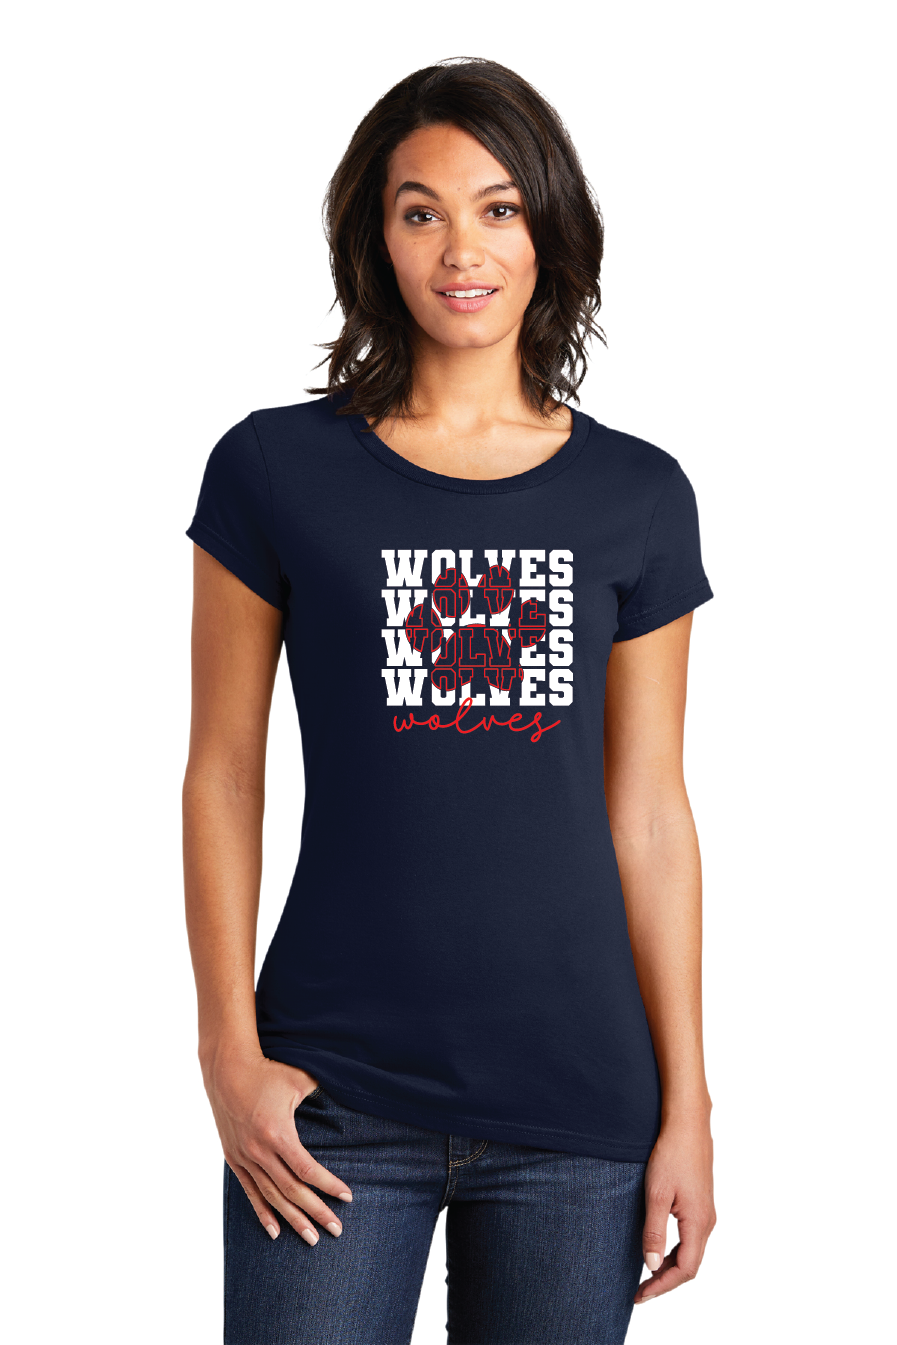 MLK Wolves Grey Ladies T- Try Out Tshirt